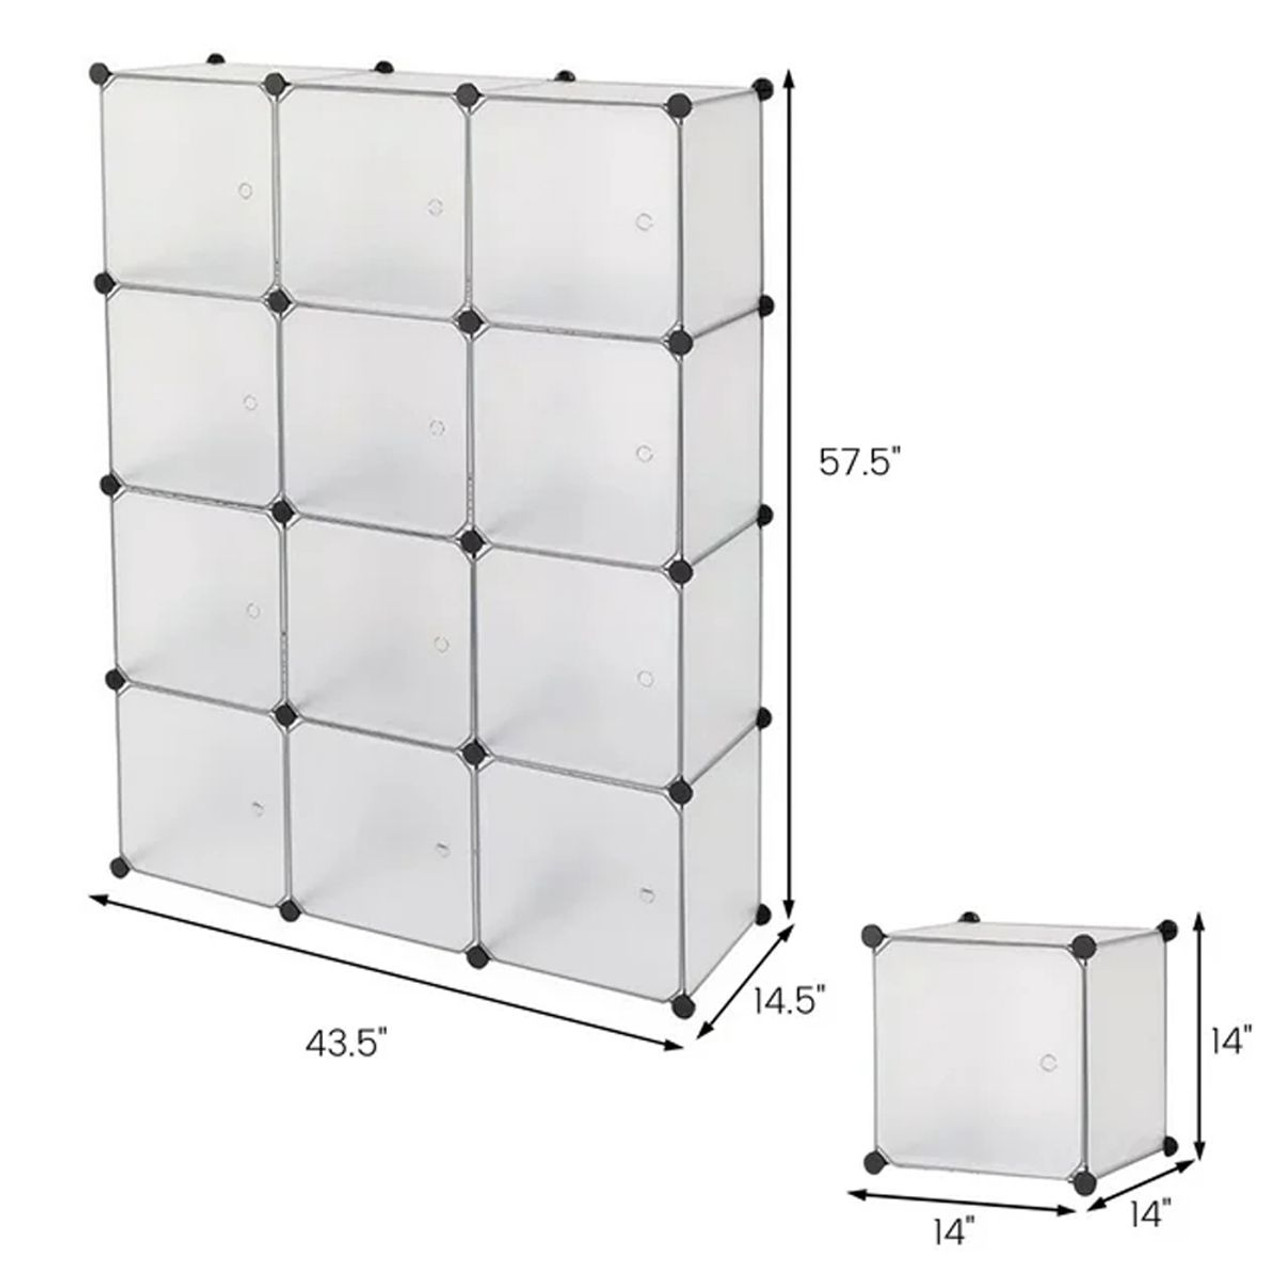 14 x 14-Inch Cube Storage Organizers (Set of 12) product image